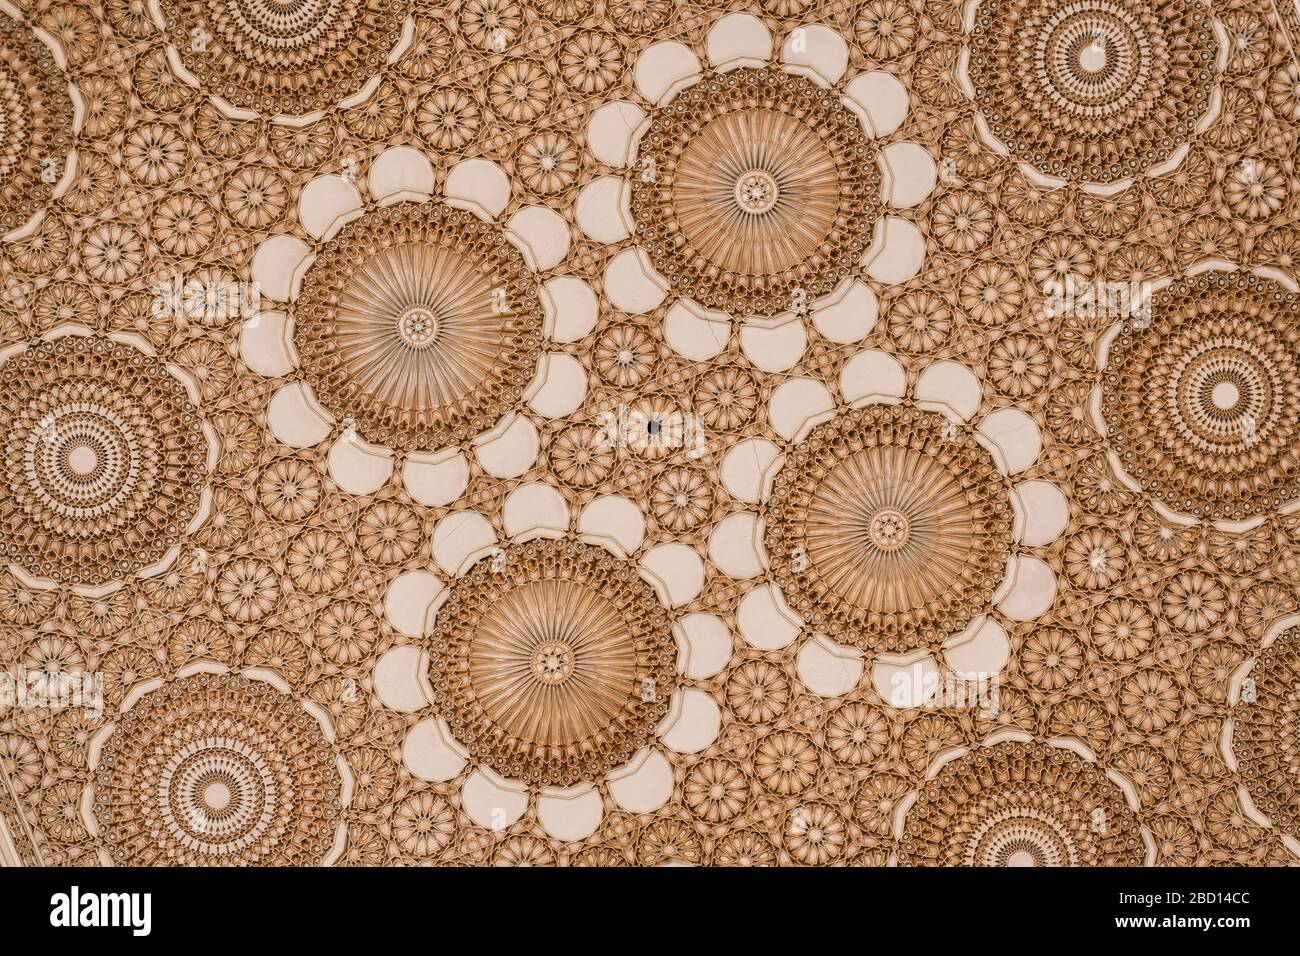 Beautiful ceiling with carved plaster decoration. Architectural detail from the mosque Hassan II in Casablanca, Morocco. Stock Photo